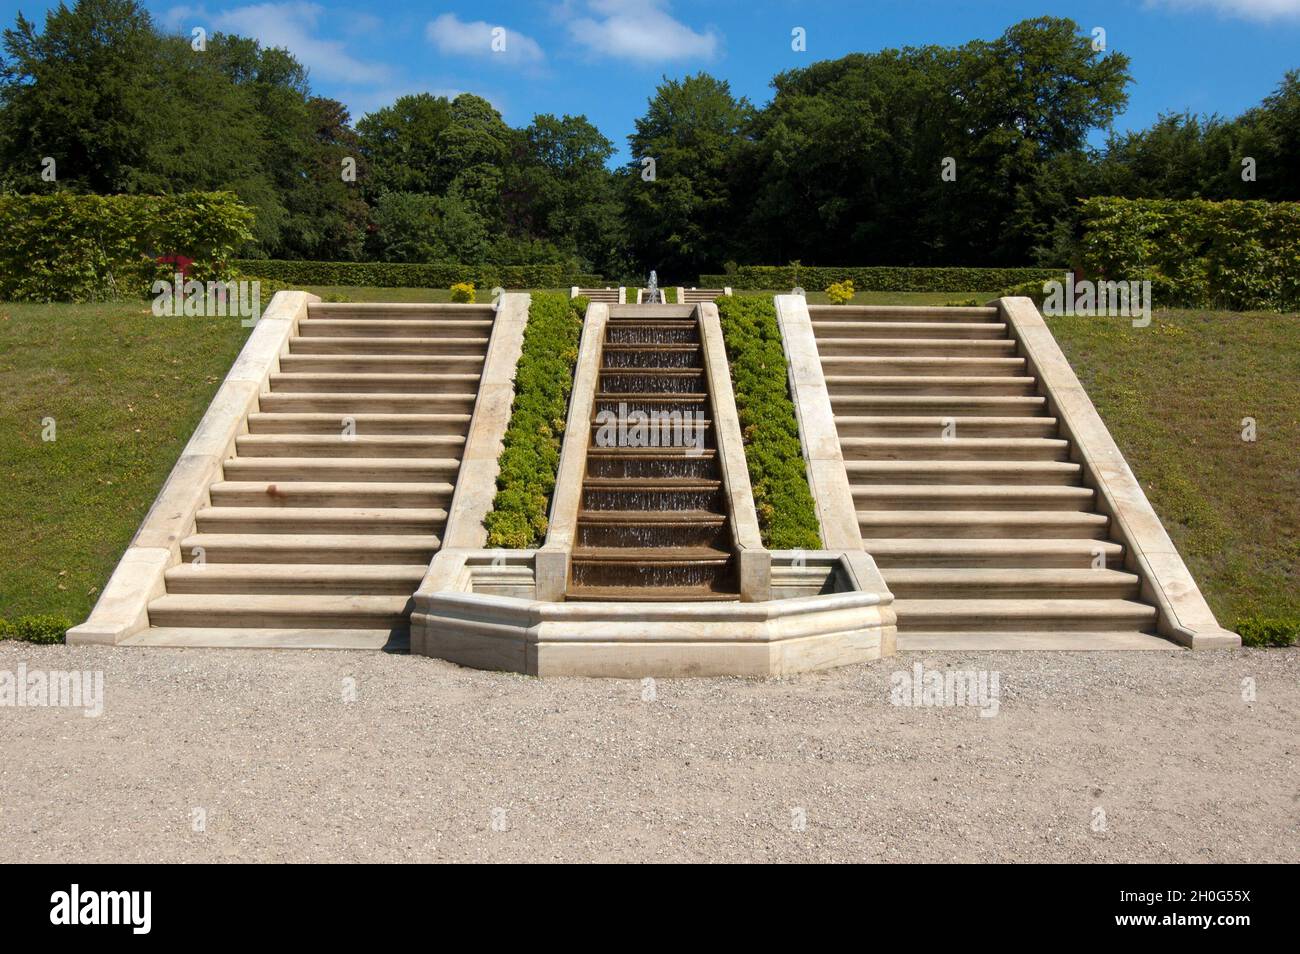 Schleswig, Germany - June 27, 2010: Grand staircase with water cascade in the terraces of the baroque Neuwerk garden of Gottorf Castle Stock Photo